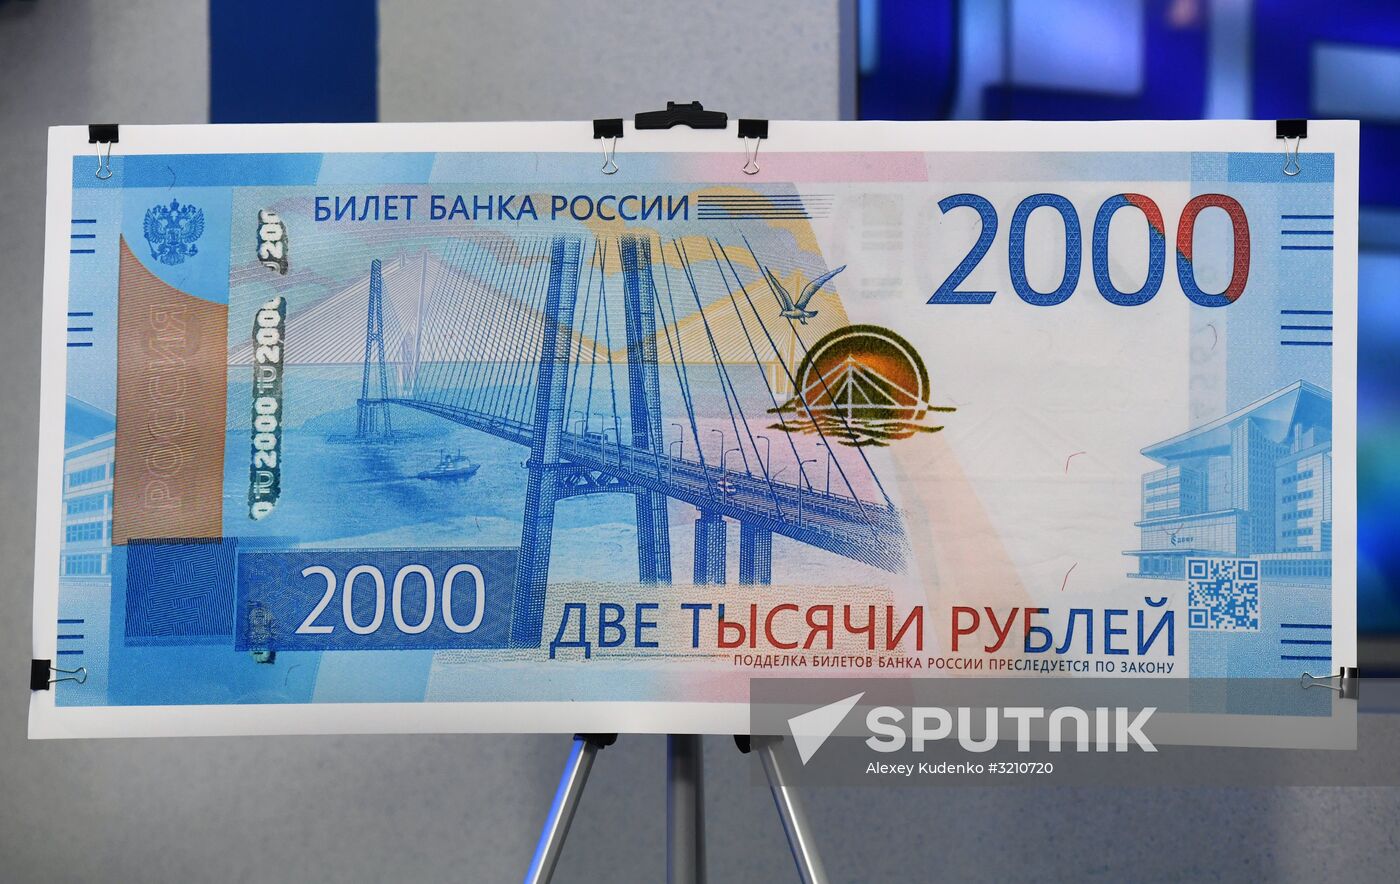 Presentation of new 200 and 2000 ruble notes